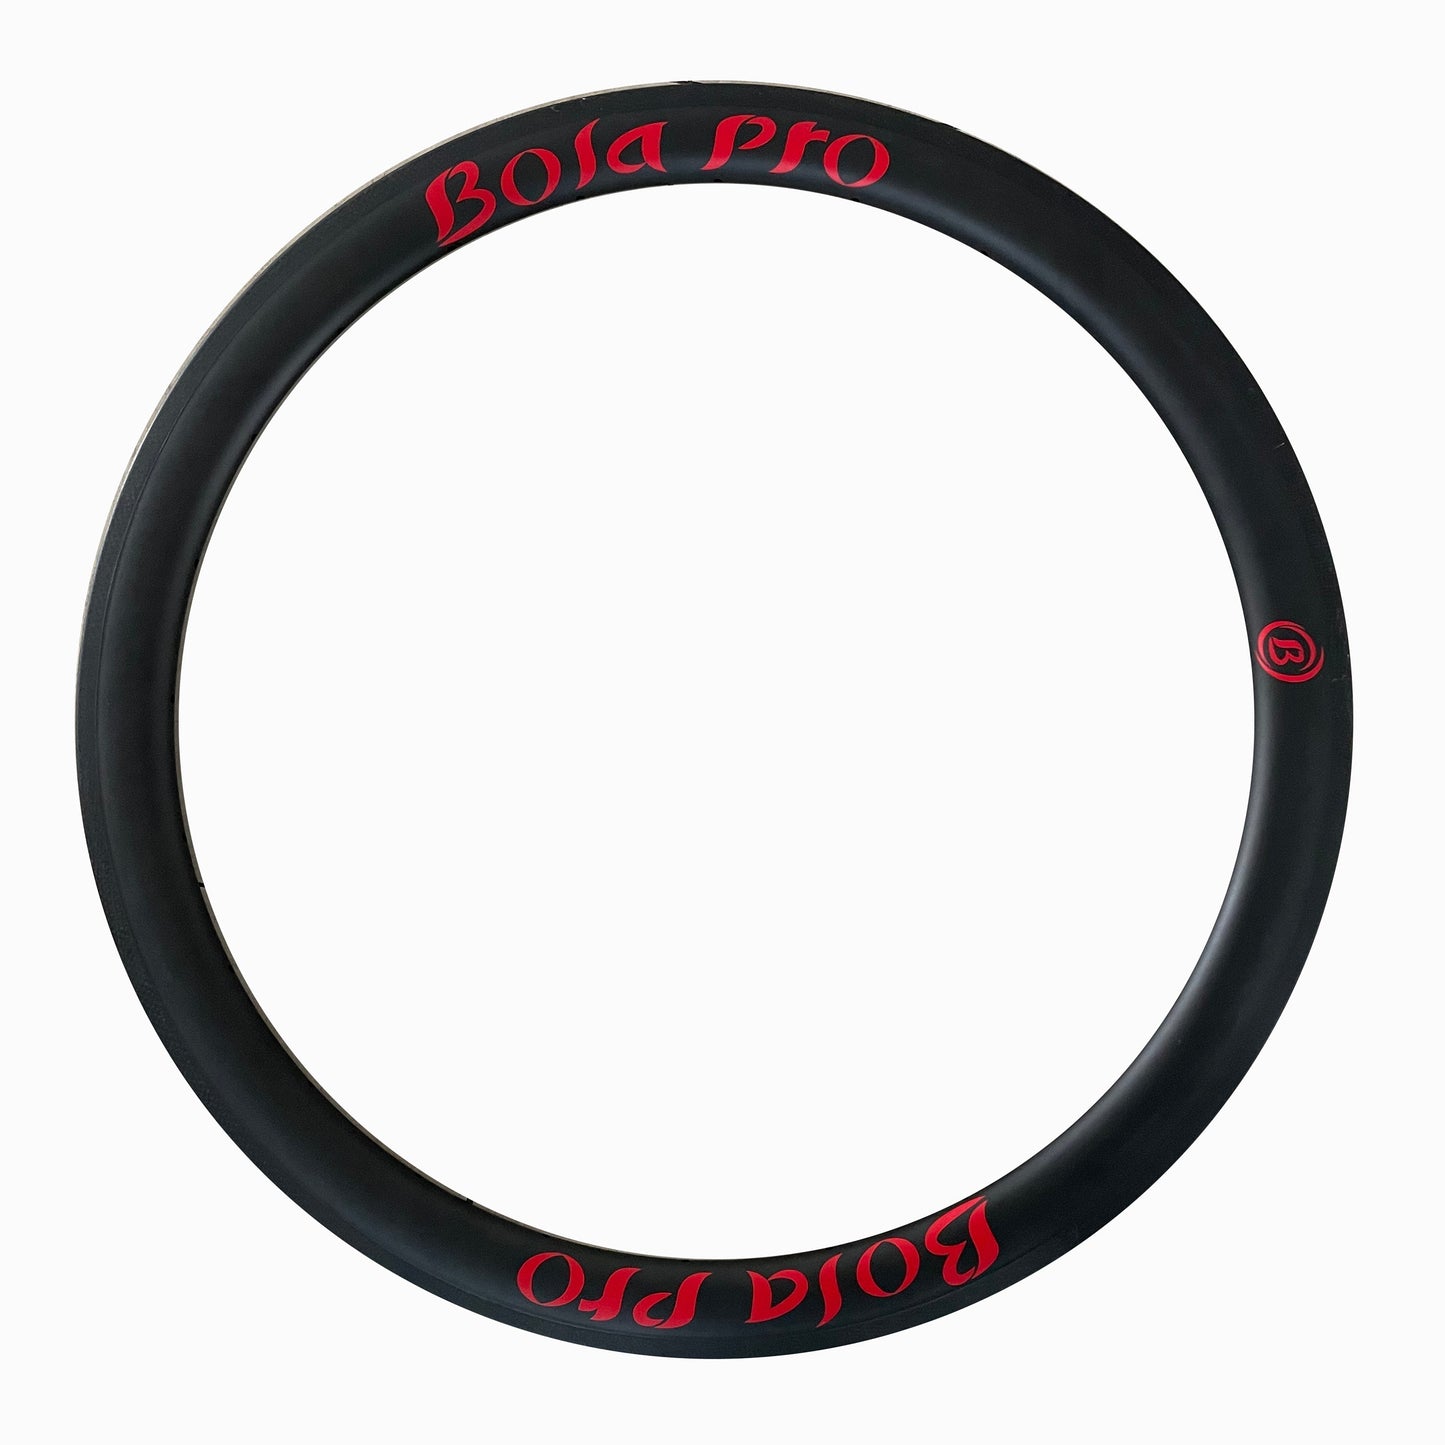 Tubeless  carbon rims 30mm profile  28mm wide for Disc Brake